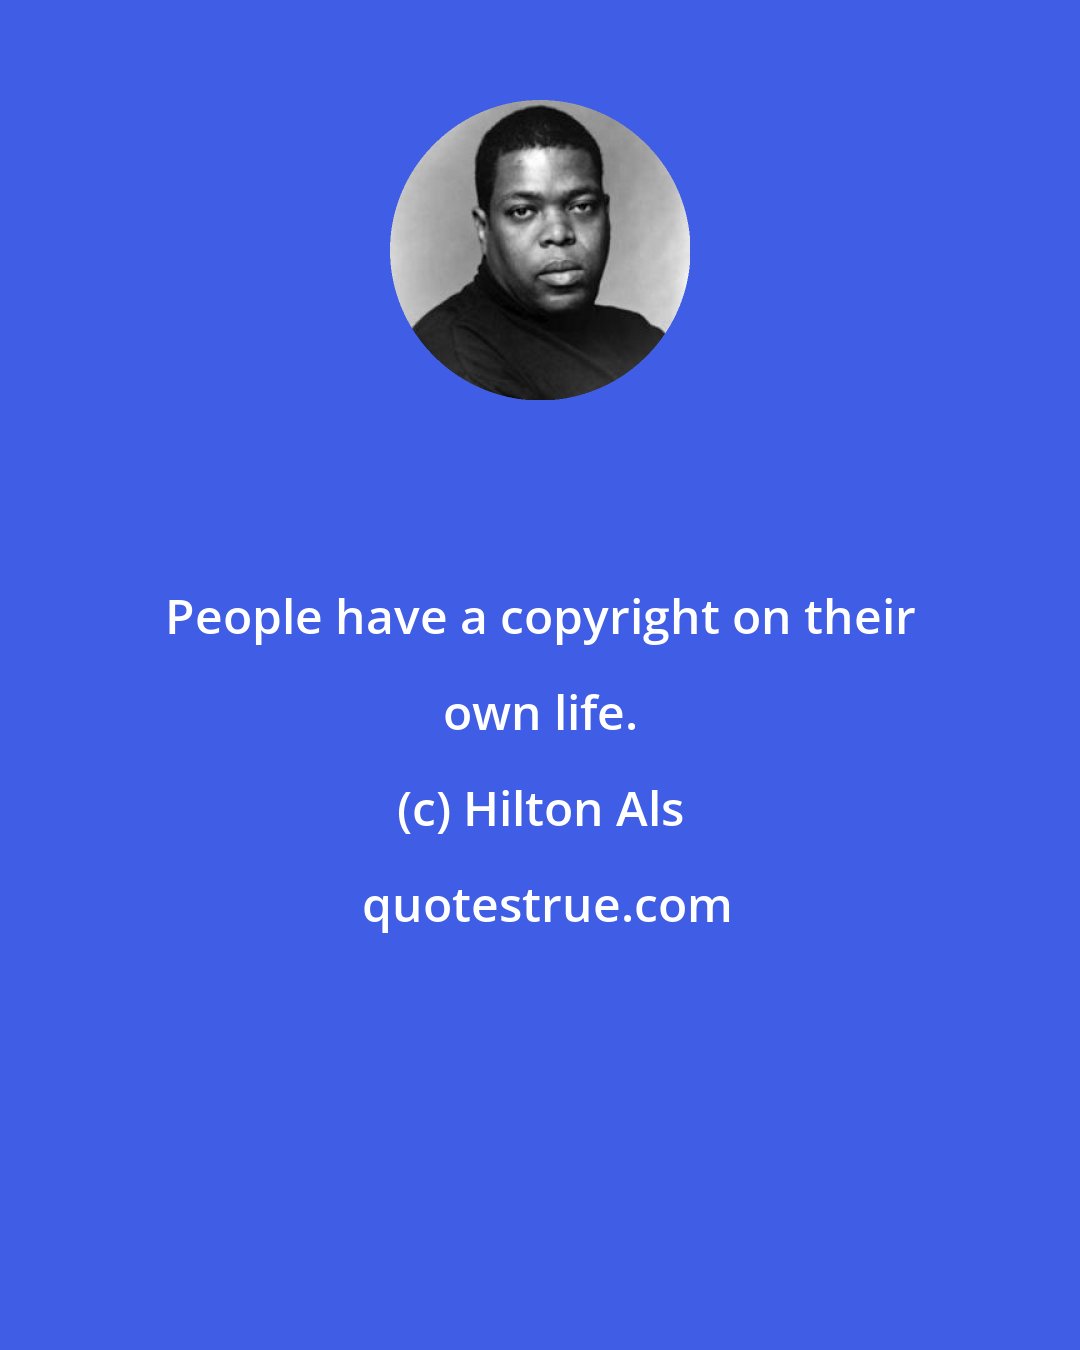 Hilton Als: People have a copyright on their own life.